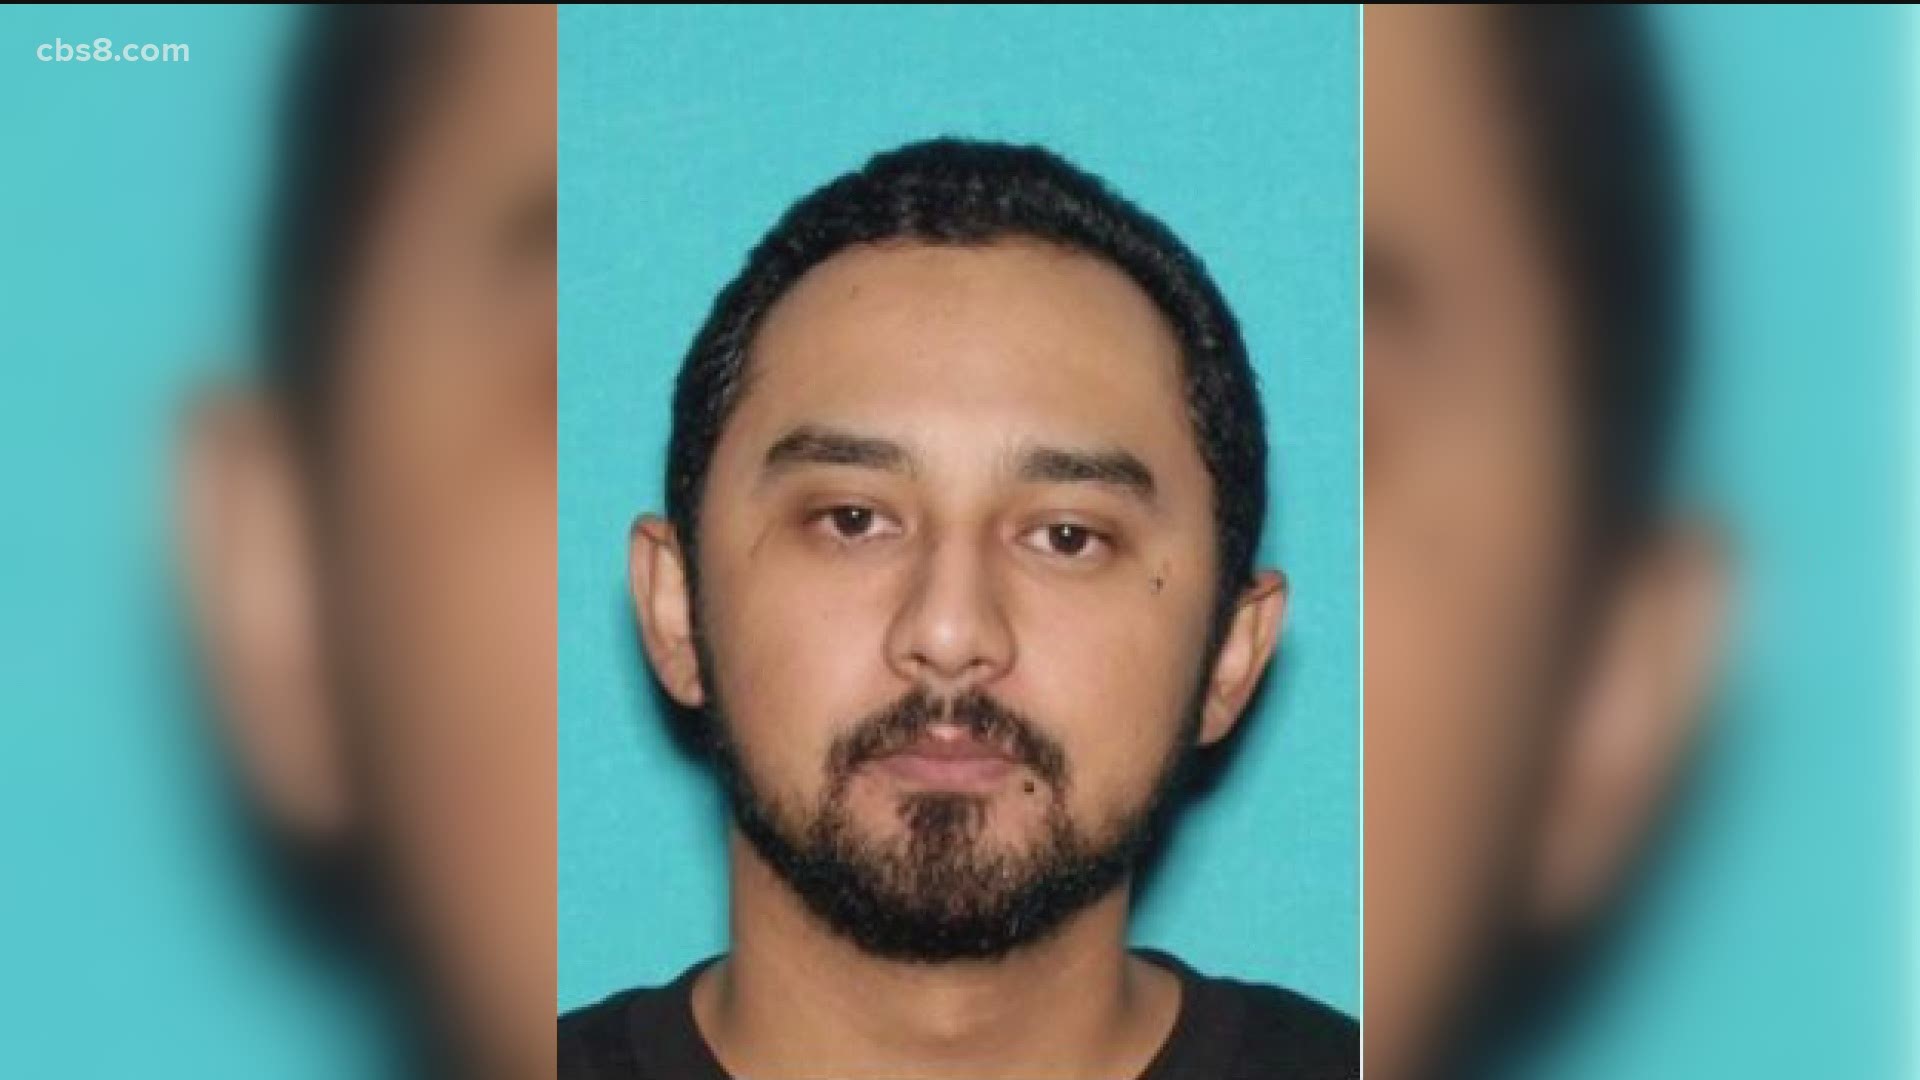 Police said they are looking for a 29-year-old Hispanic man, wearing a long black sleeved t-shirt who is considered armed and dangerous.